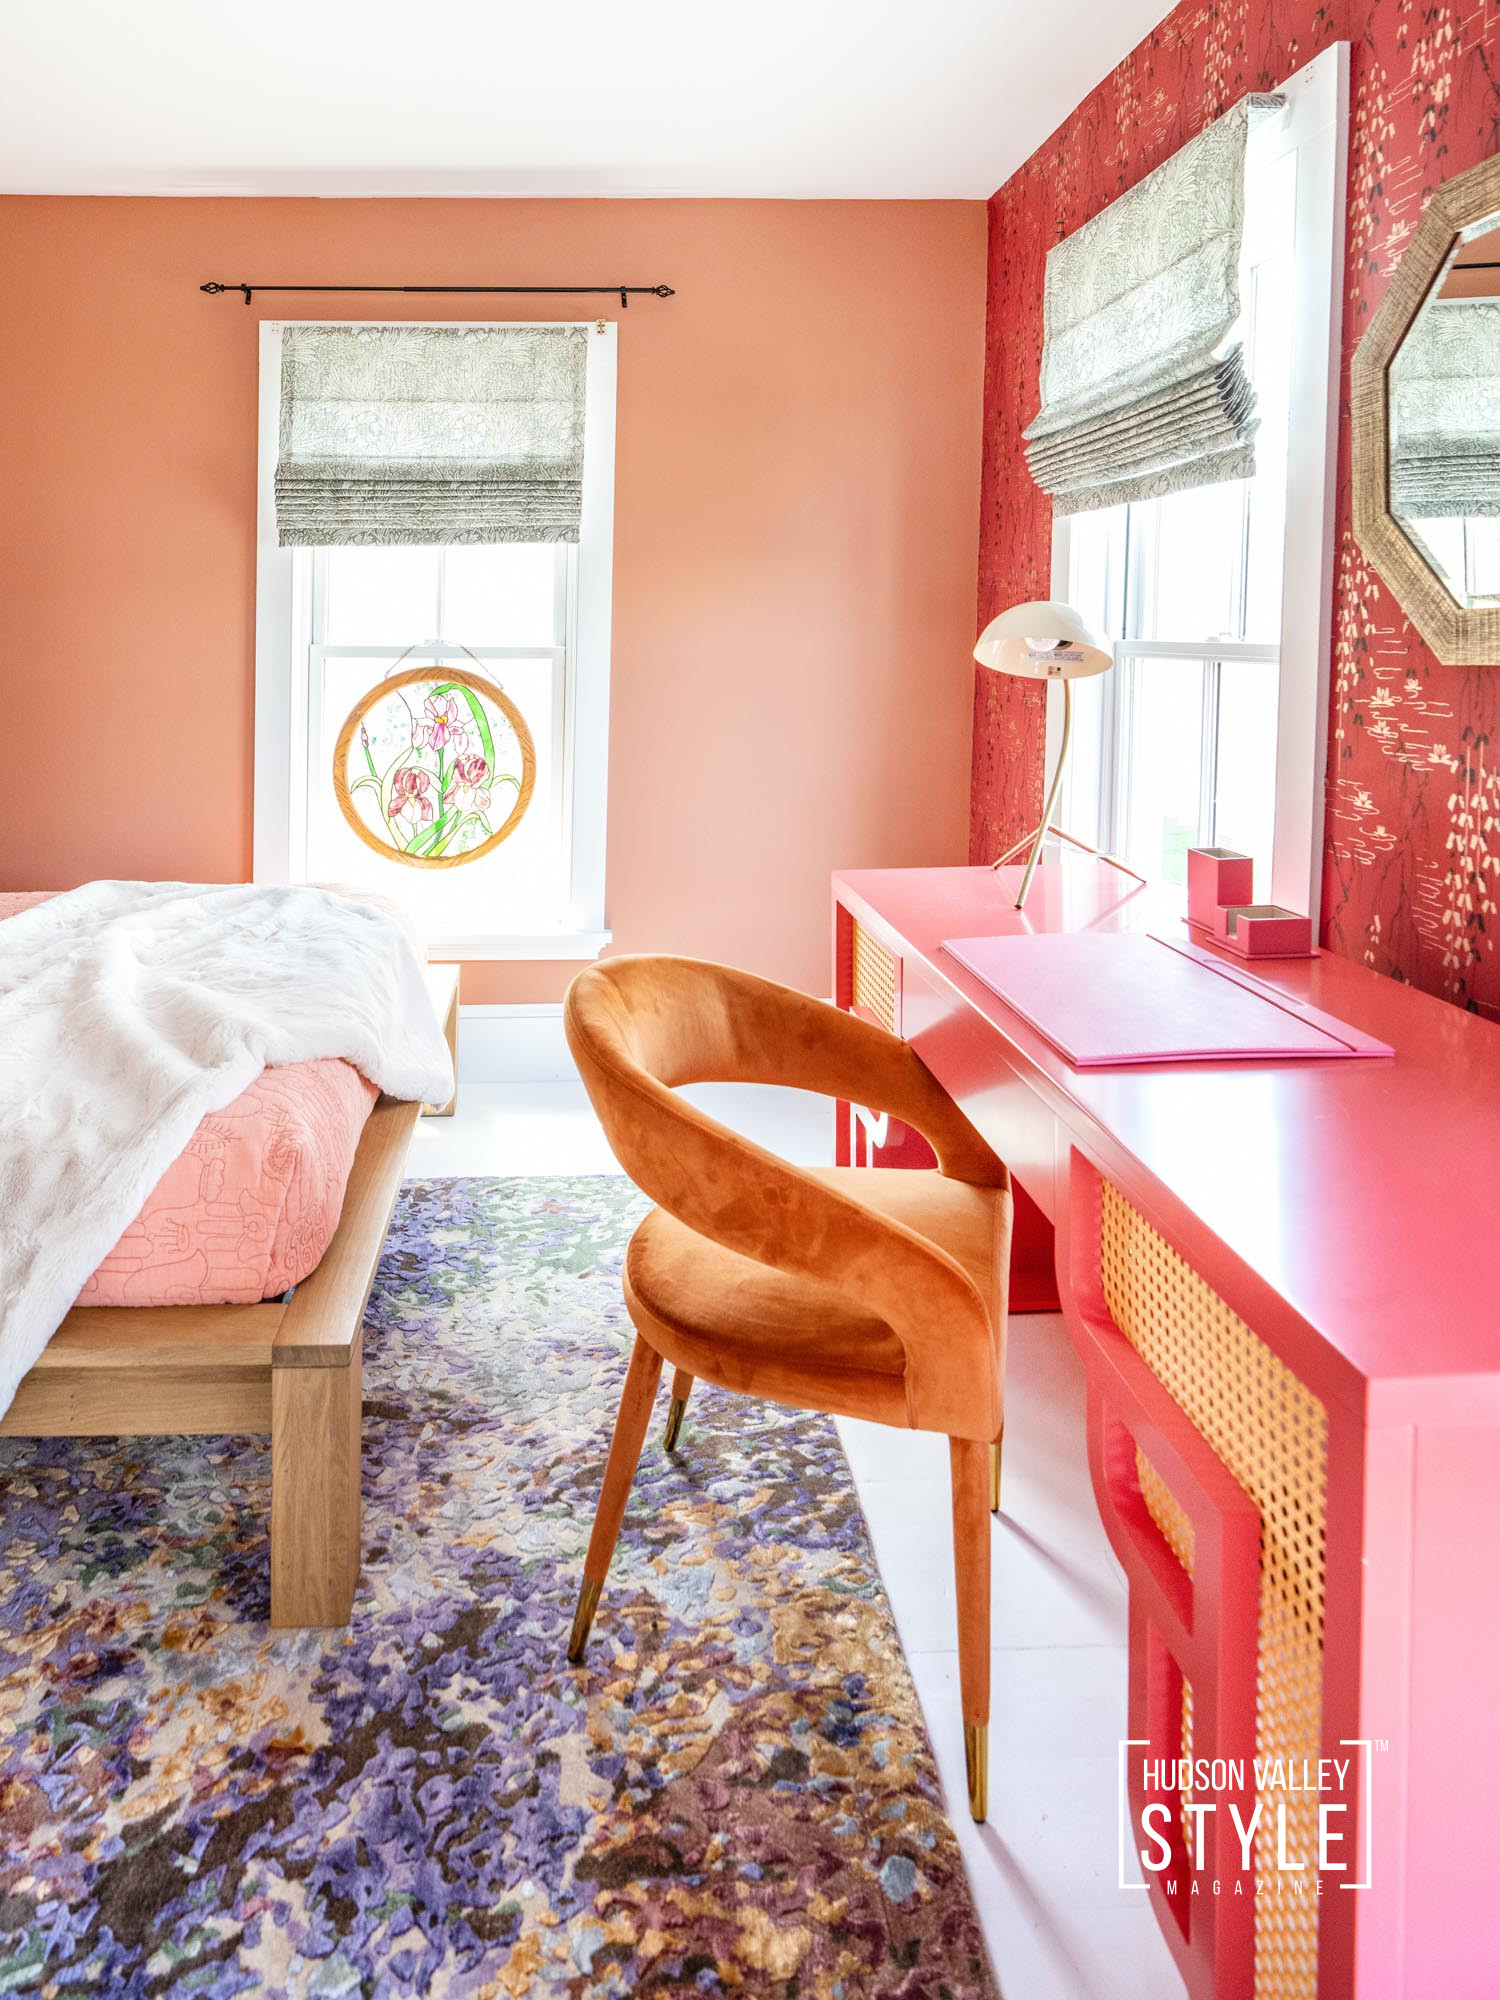 Maximalism: The Bold New Interior Design Trend Taking Over Homes Everywhere – Interior Design Trends with Designer/Photographer Maxwell Alexander, MA, BFA, EIC, Hudson Valley Style Mag – Photography ©2023 Alluvion Media